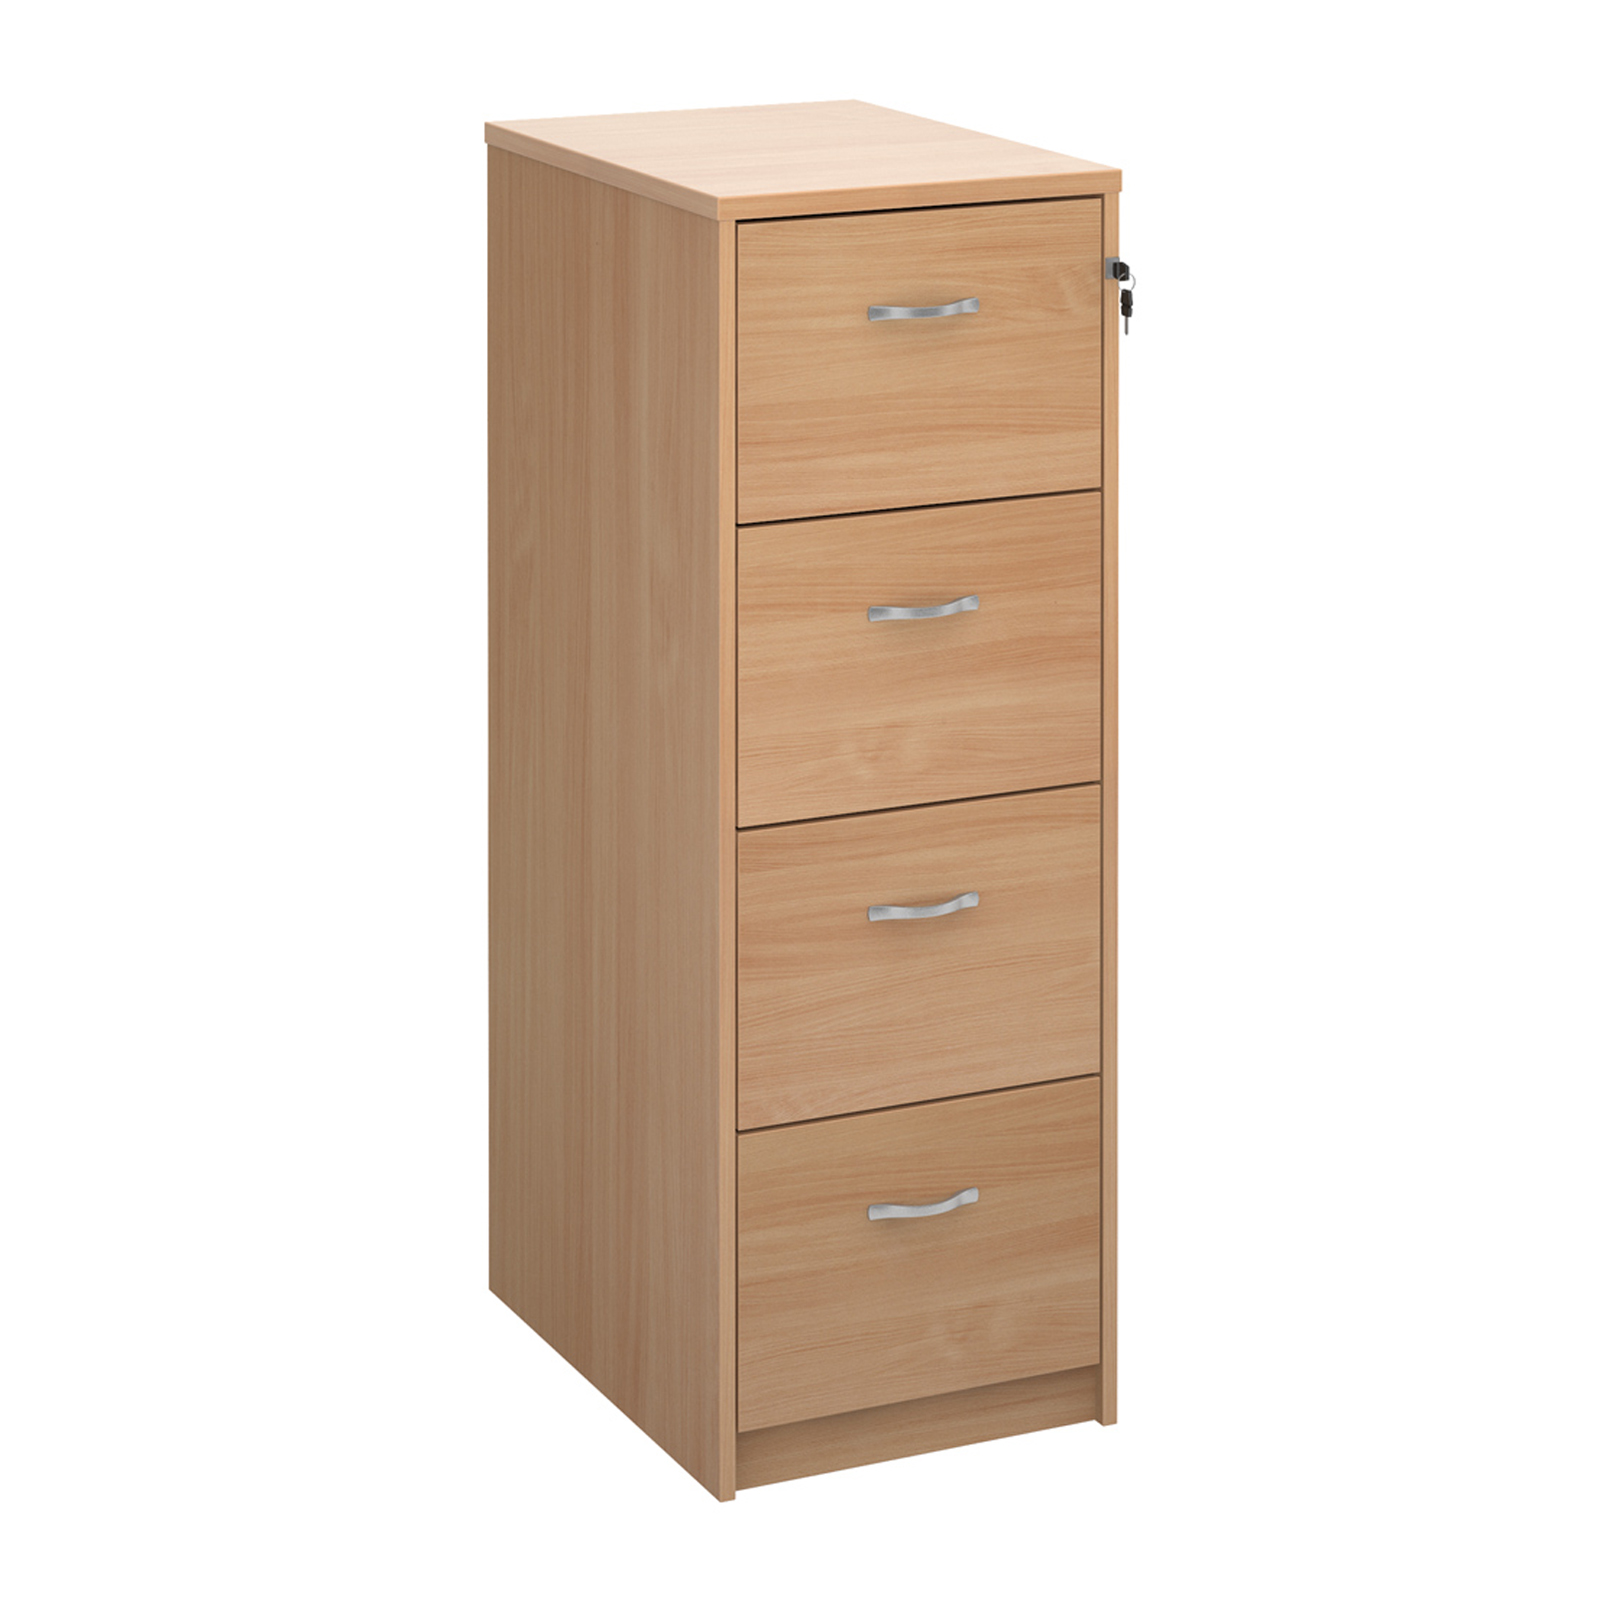 Wood Wooden 4 drawer filing cabinet with silver handles 1360mm high - beech